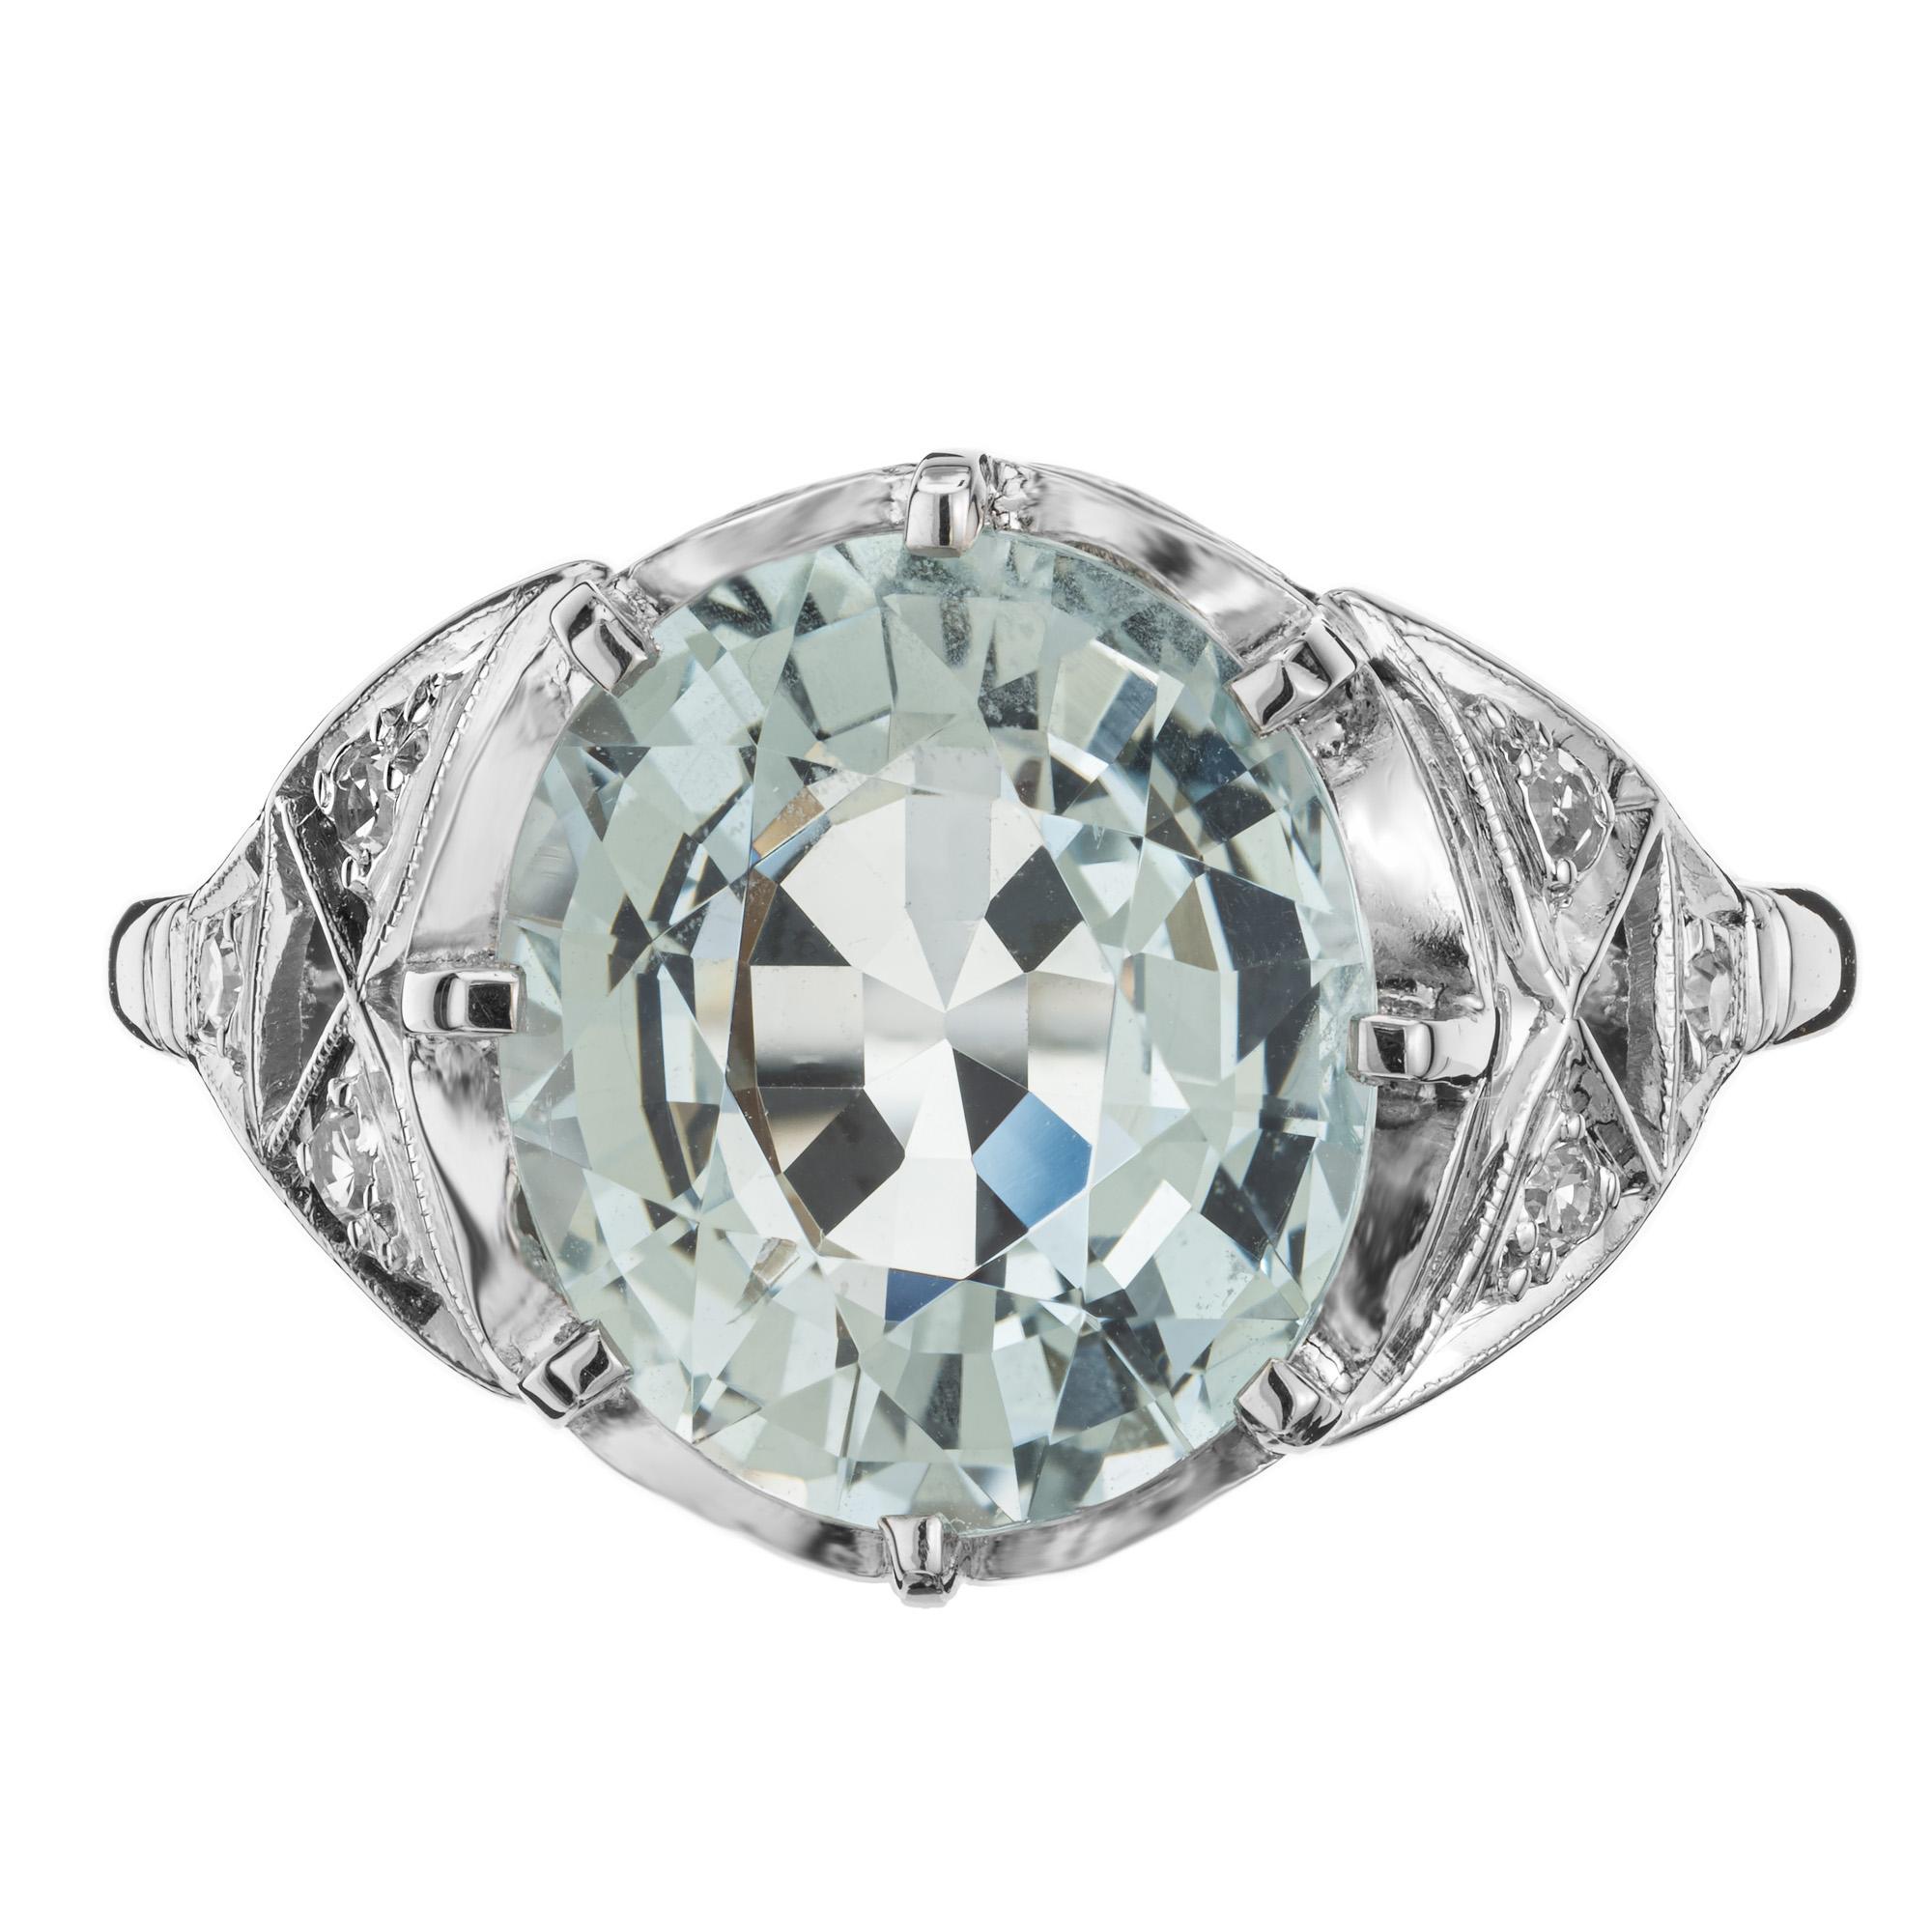 1915 original 4.13 Carat Aquamarine and Diamond Platinum Art Deco open work ring. The centerpiece, a stunning 4.13 carat aquamarine gemstone, showcases a captivating icy blue and greenish hue. Mounted in a platinum setting and accented with 6 single